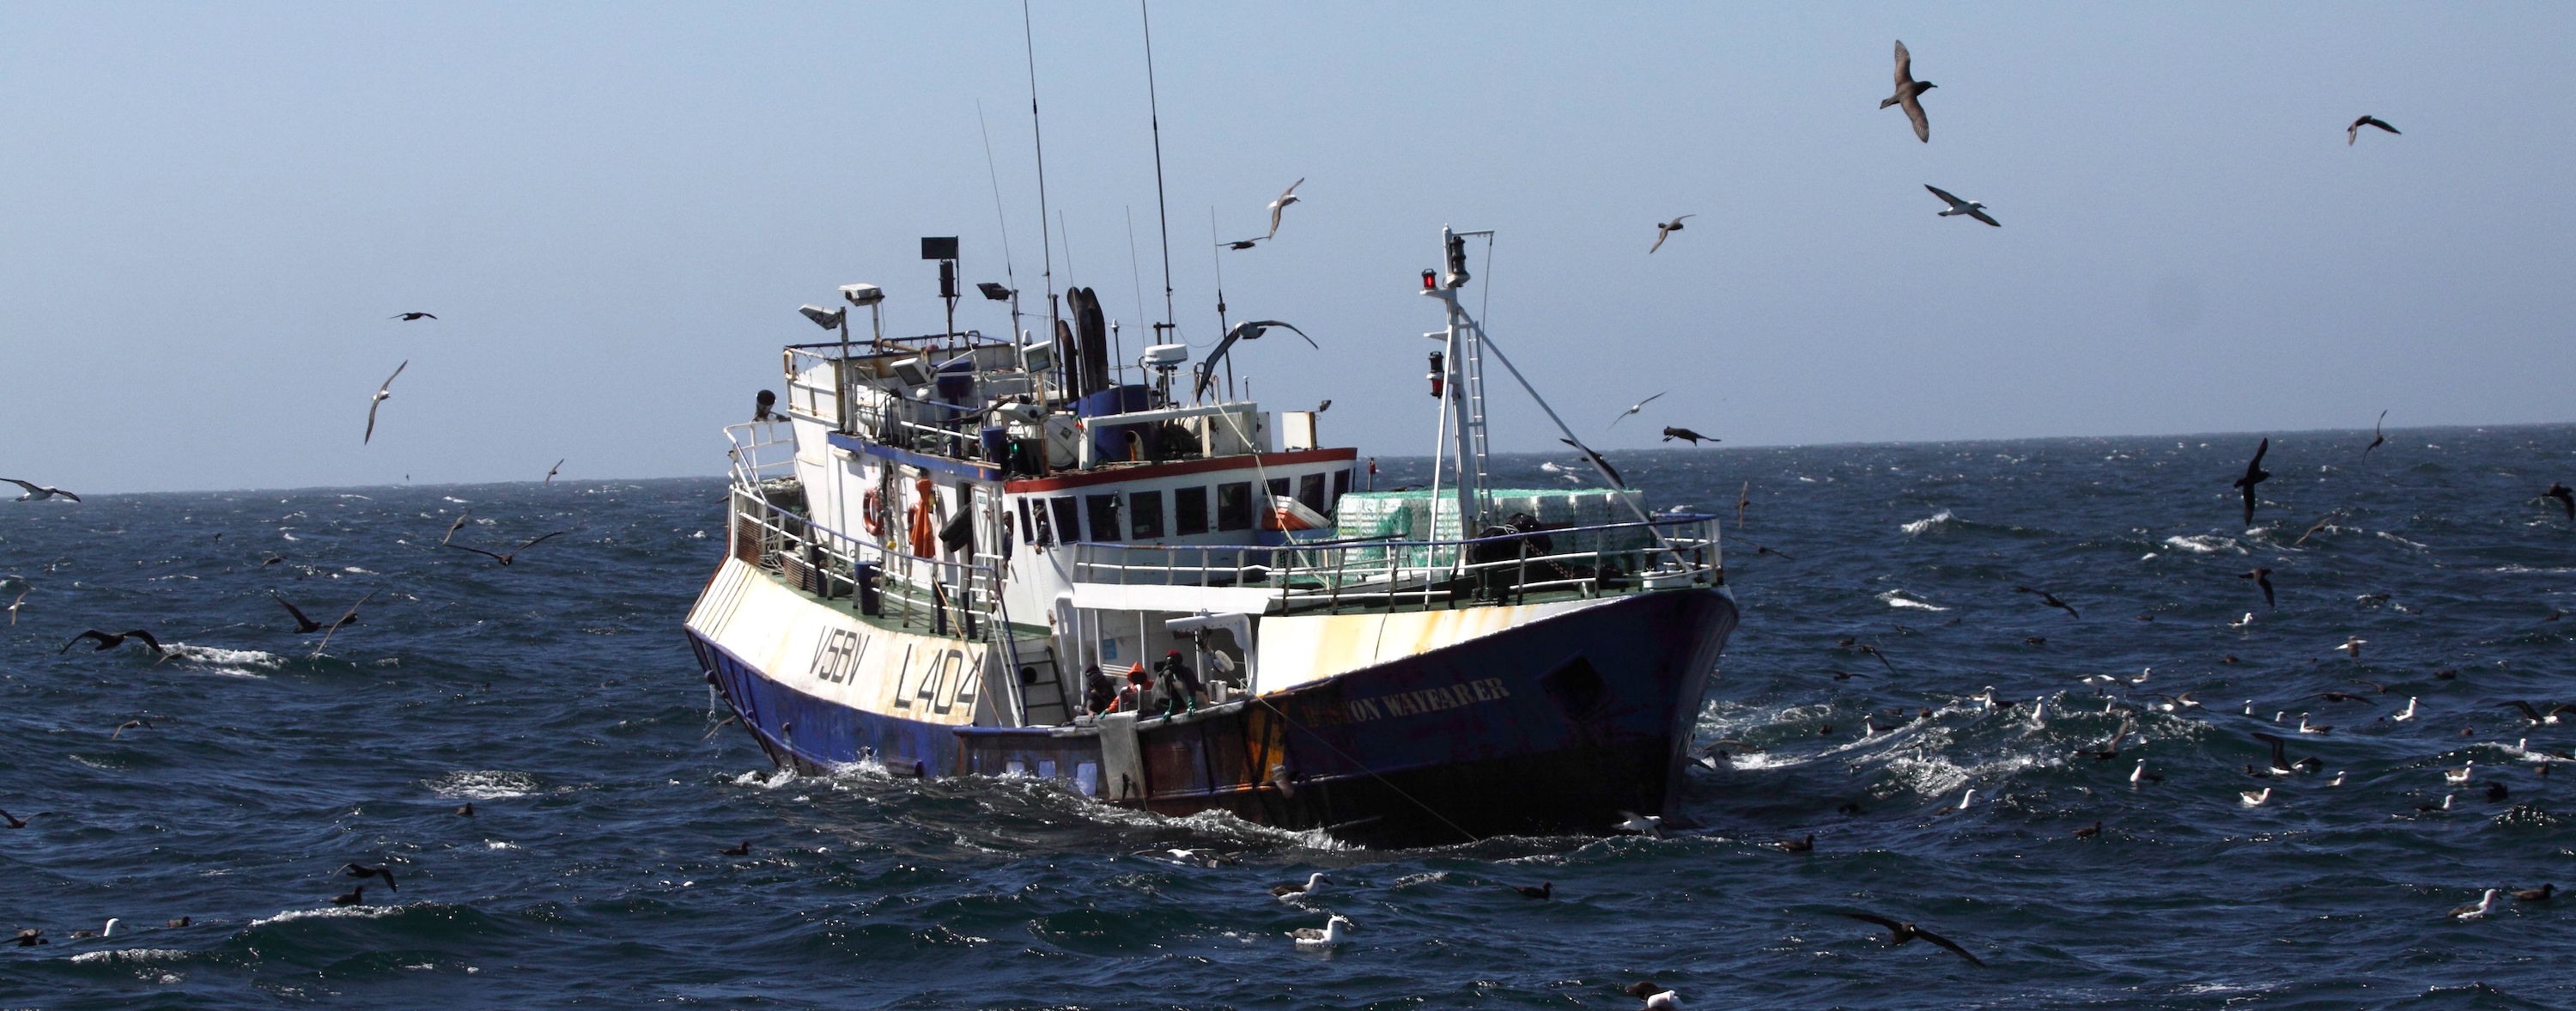 A long line fishing boat at see and surounded by sea birds.